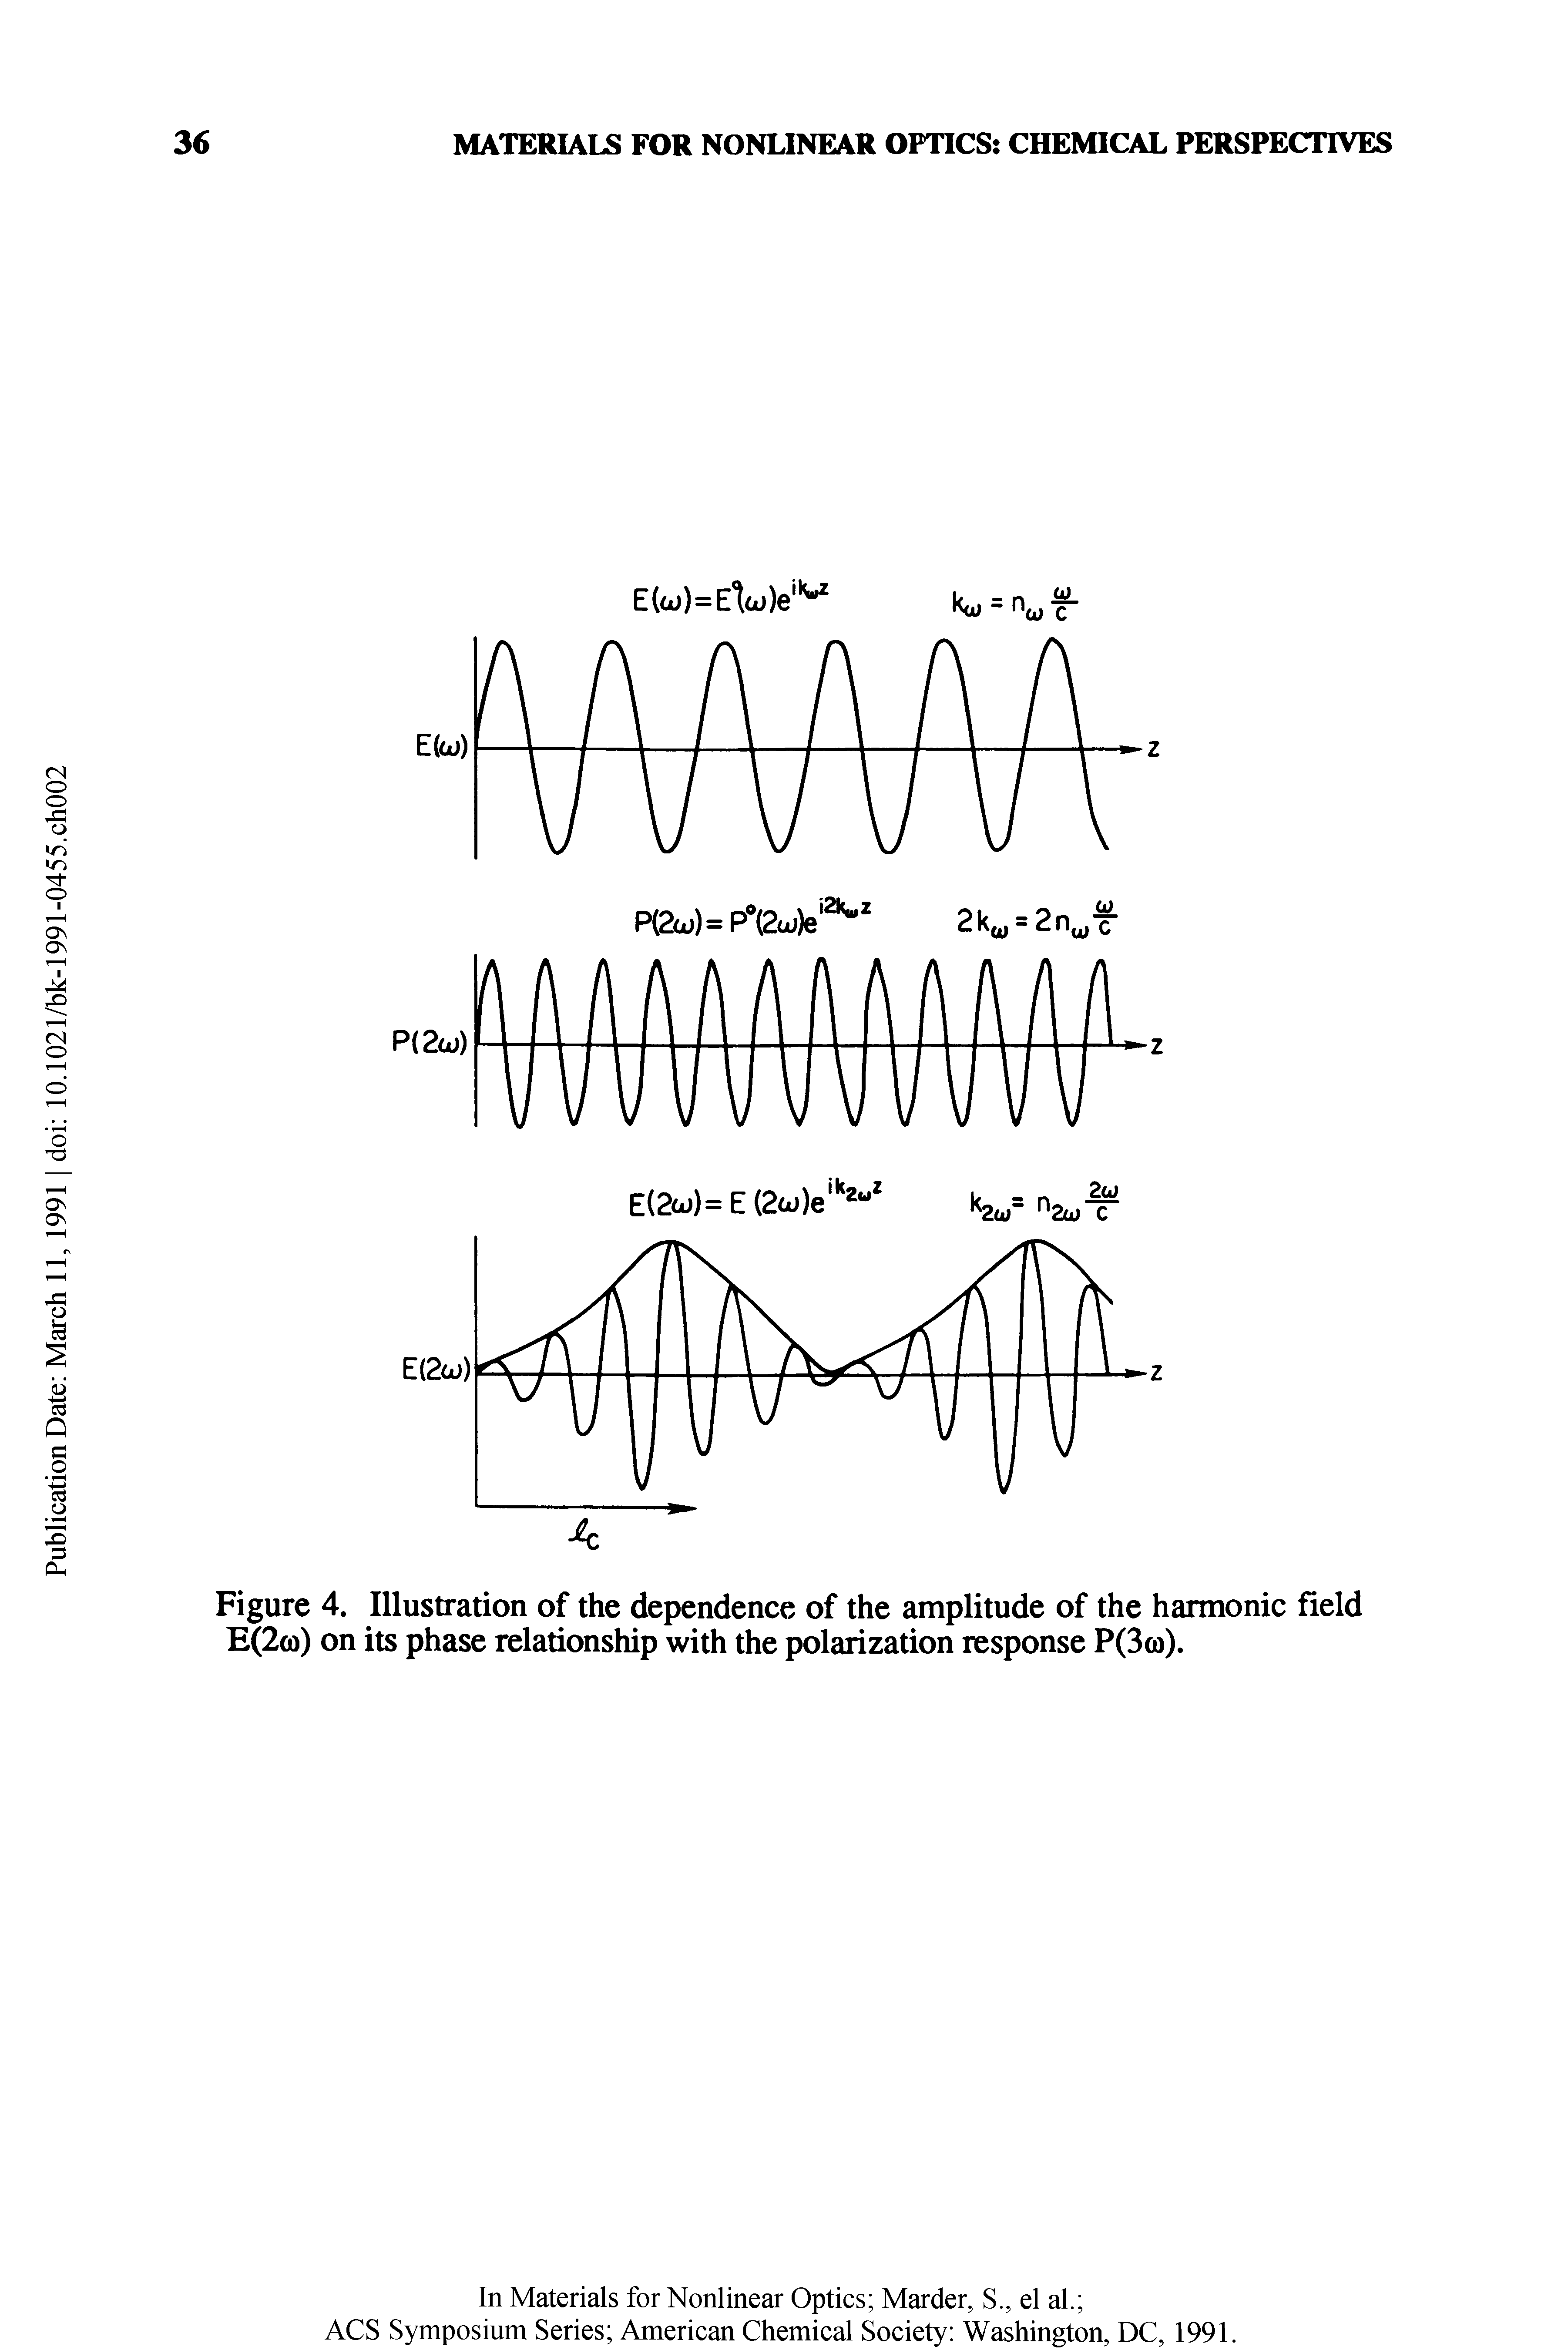 Figure 4. Illustration of the dependence of the amplitude of the harmonic field E(2co) on its phase relationship with the polarization response P(3co).